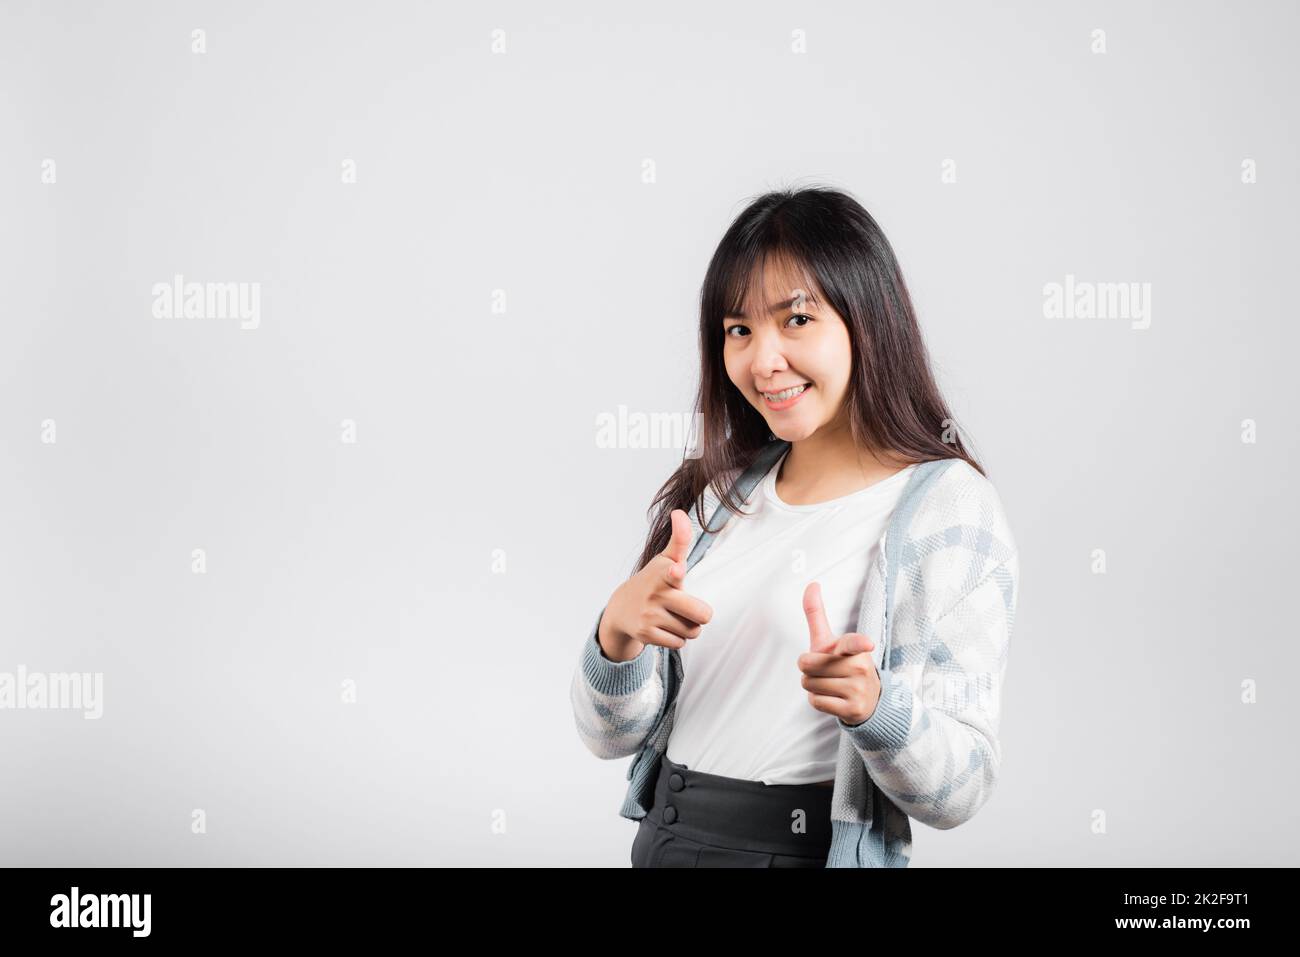 Woman excited smiling makes finger two gun gesture to camera Stock Photo